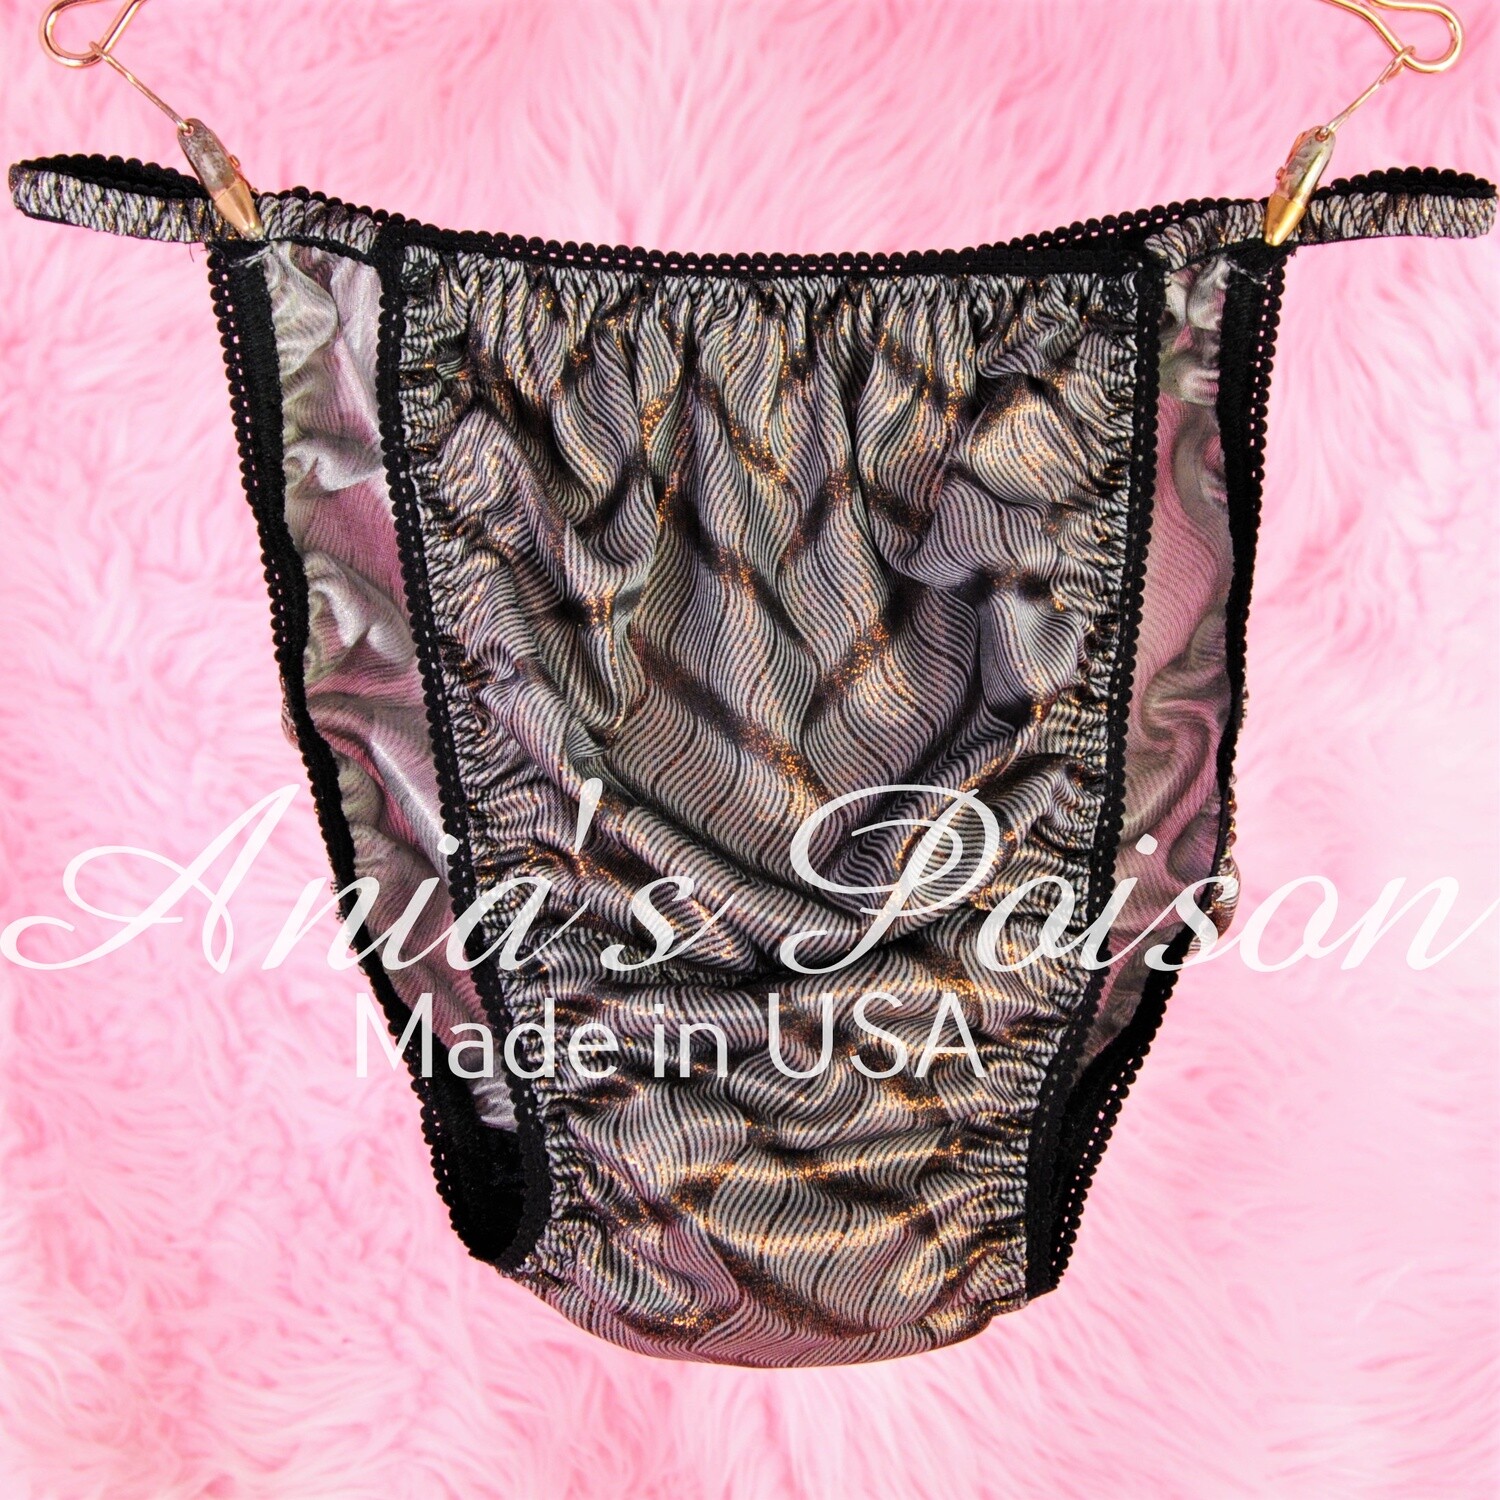 Ania's Poison MANties S - XL shiny Rare Butter Gray Black Soft Collection polyester string bikini sissy mens underwear panties